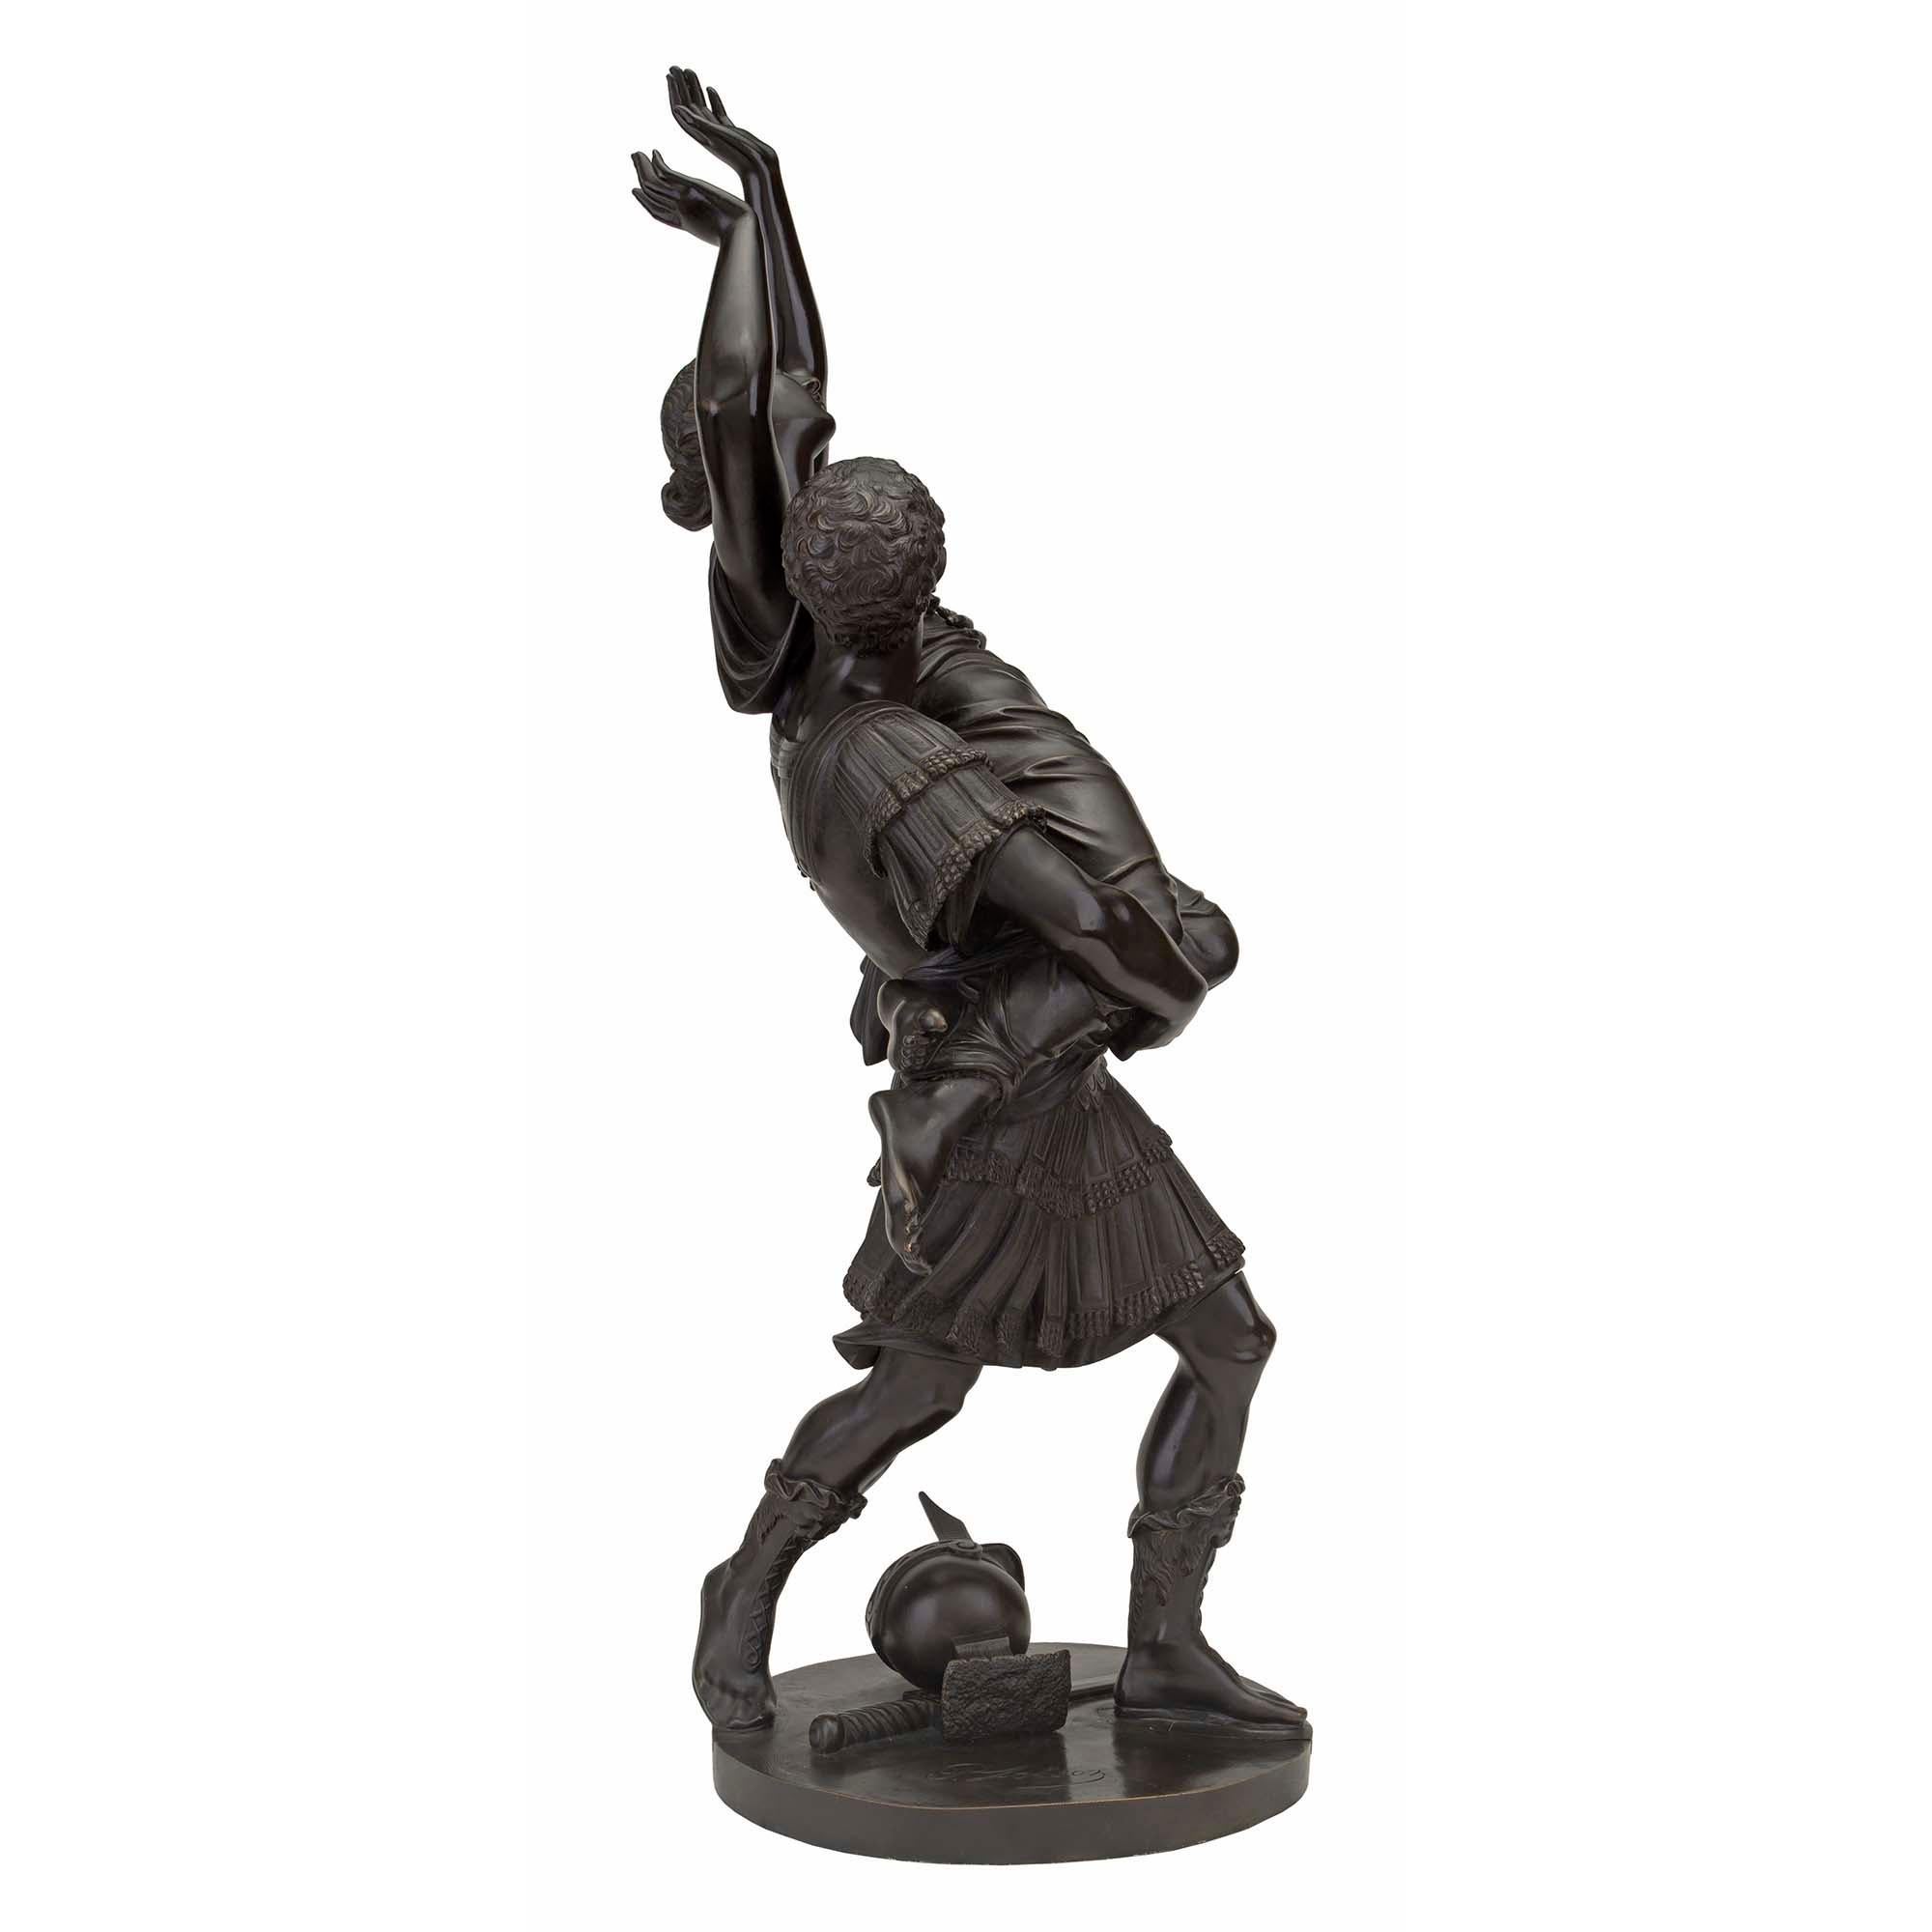 A striking French 19th century Louis XVI st. bronze statue of L'Enlevement des Sabines signed Raingo Frères. The high quality bronze is raised by a circular base where the soldier's helmet and sword are lying on the ground. The handsome soldier is